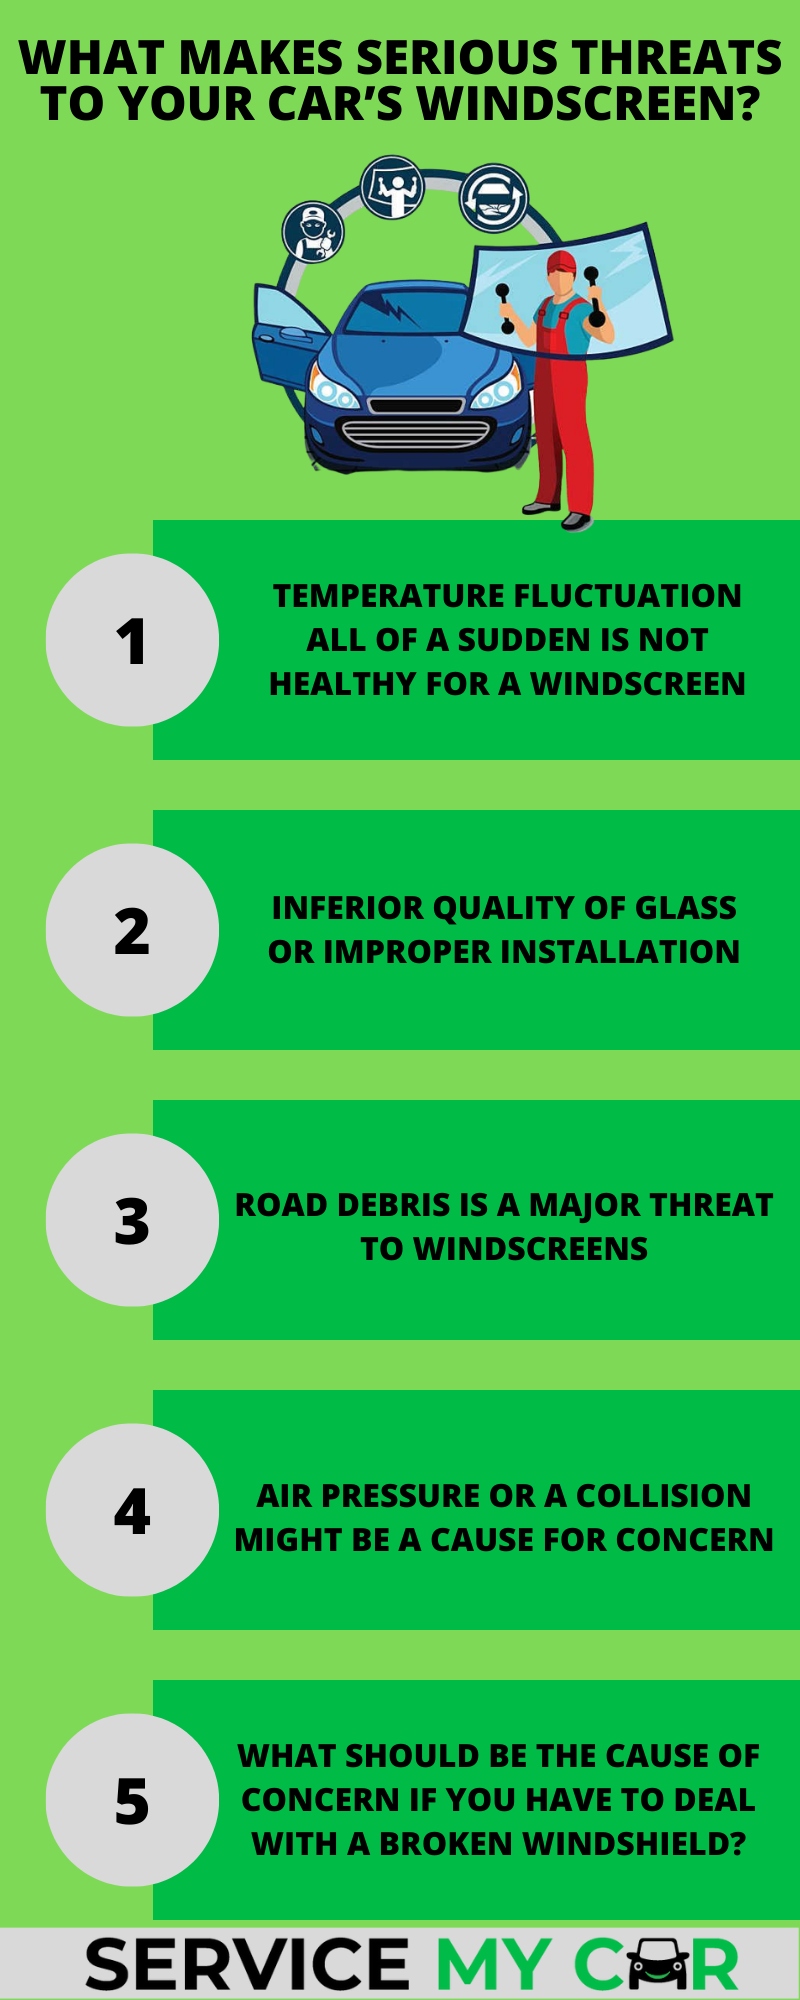 What Makes Serious Threats to Your Car’s Windscreen